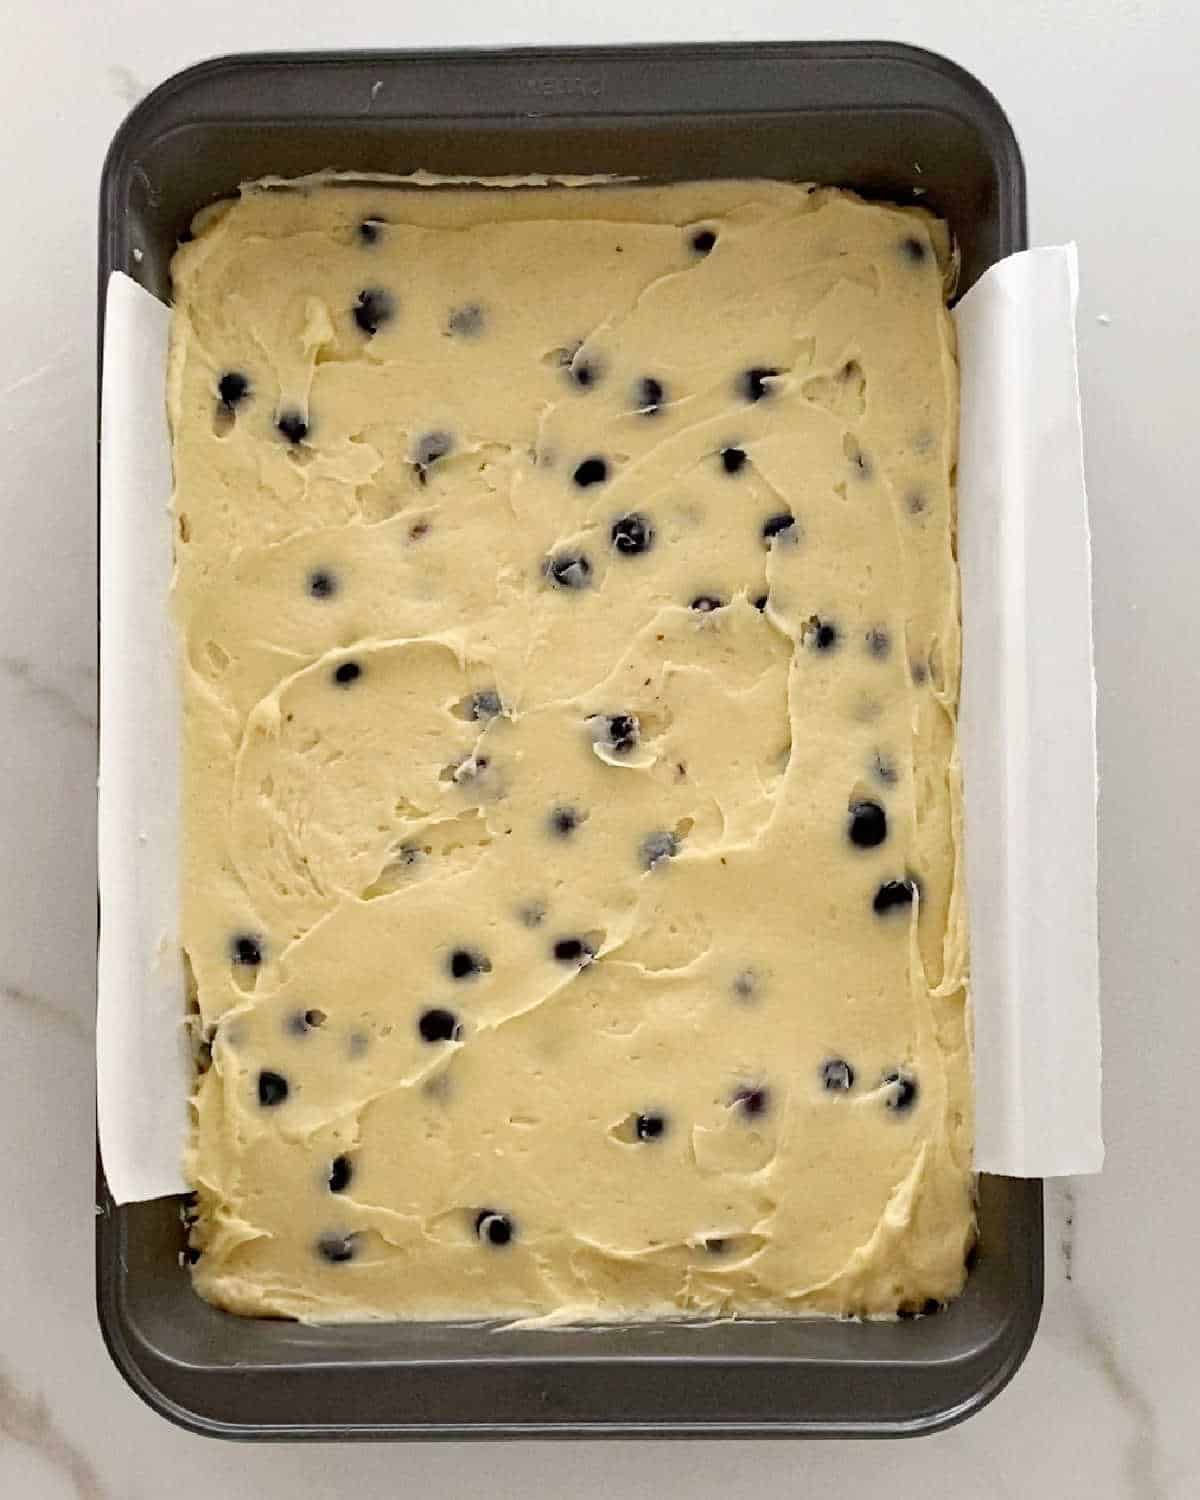 Batter for blueberry coffee cake in a metal rectangular pan. White surface.